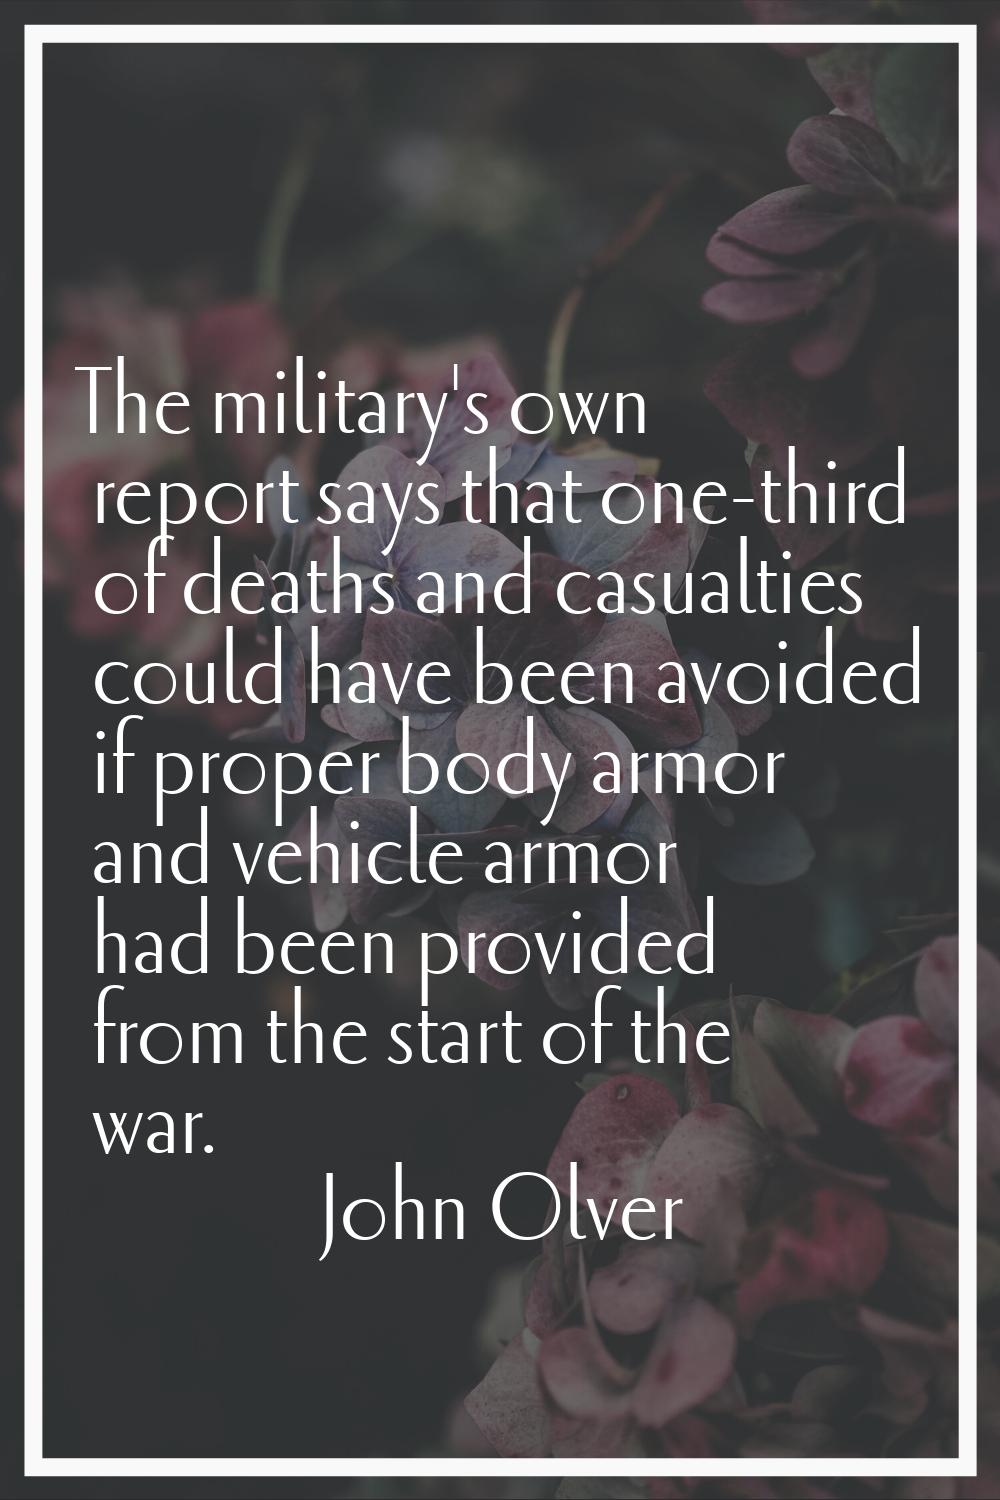 The military's own report says that one-third of deaths and casualties could have been avoided if p